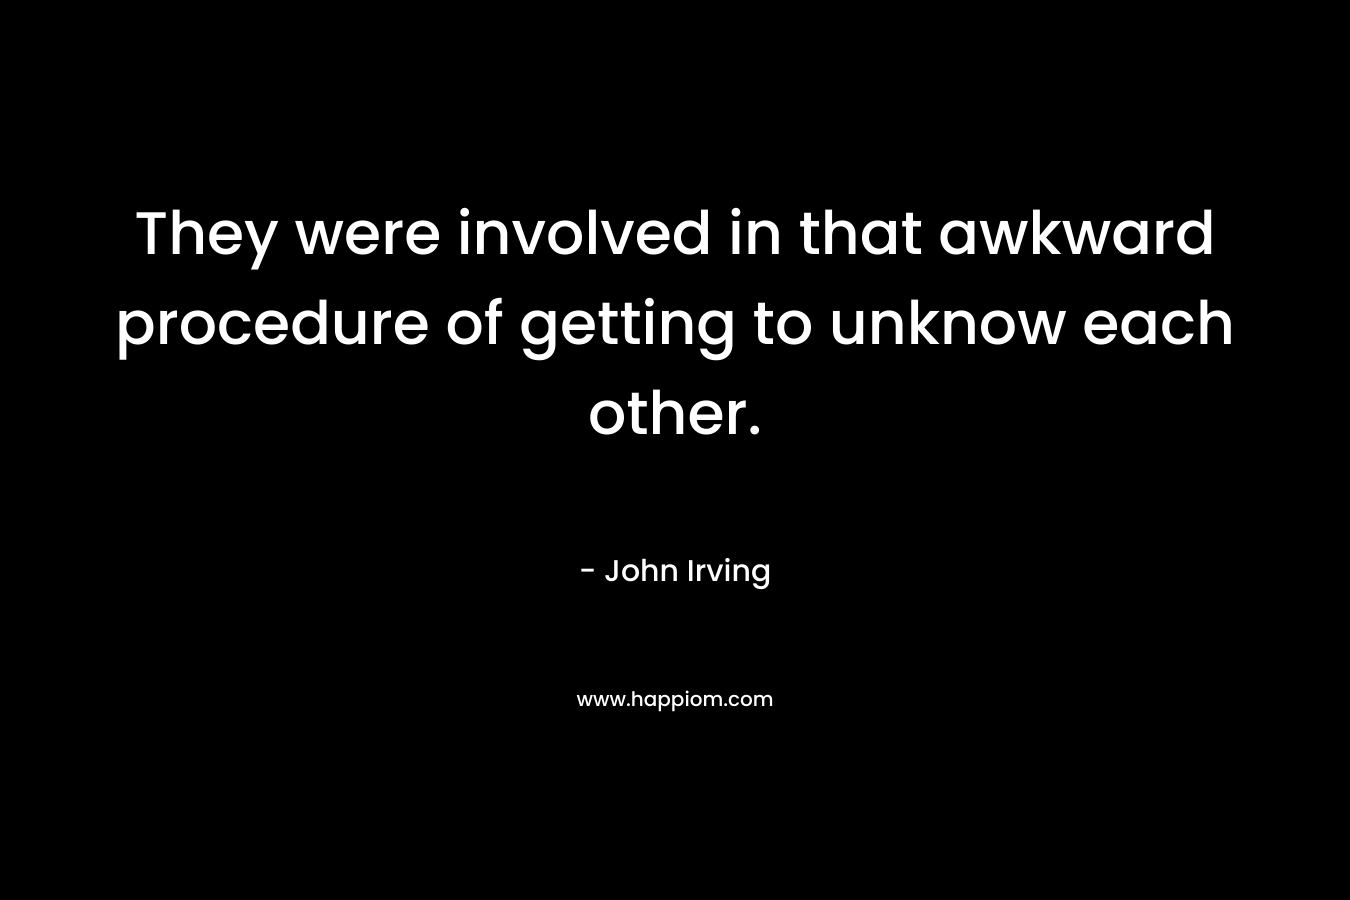 They were involved in that awkward procedure of getting to unknow each other. – John Irving